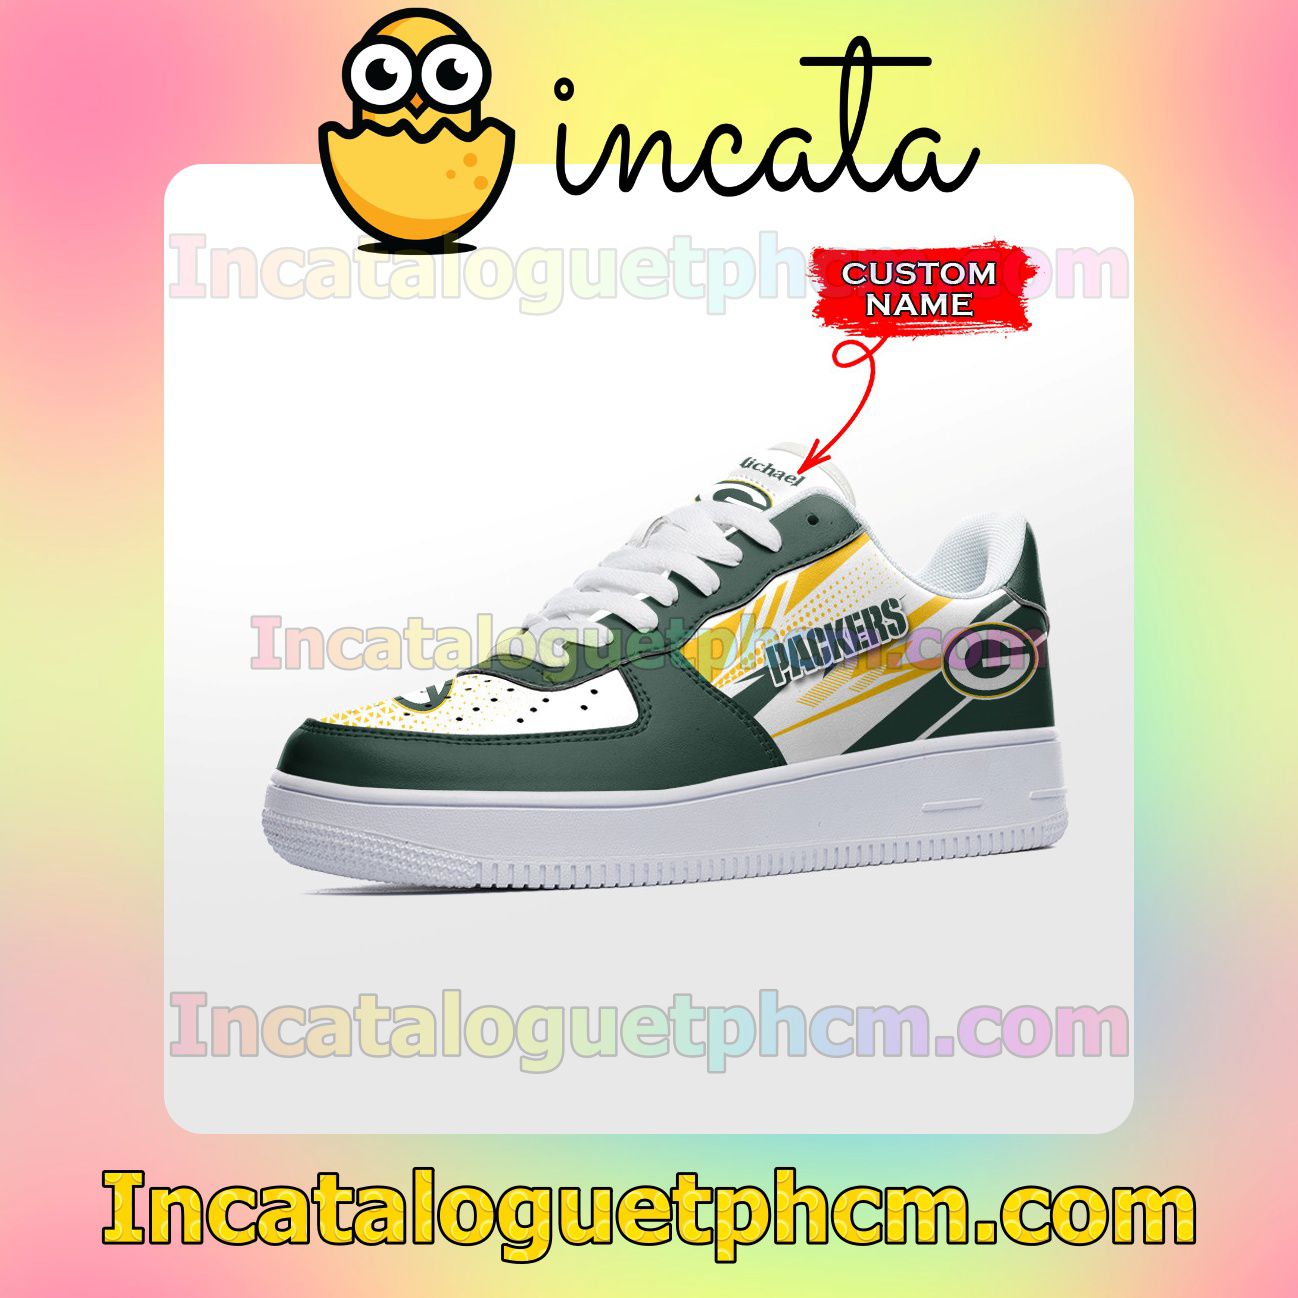 Fantastic Personalized NFL Green Bay Packers Custom Name Nike Low Shoes Sneakers